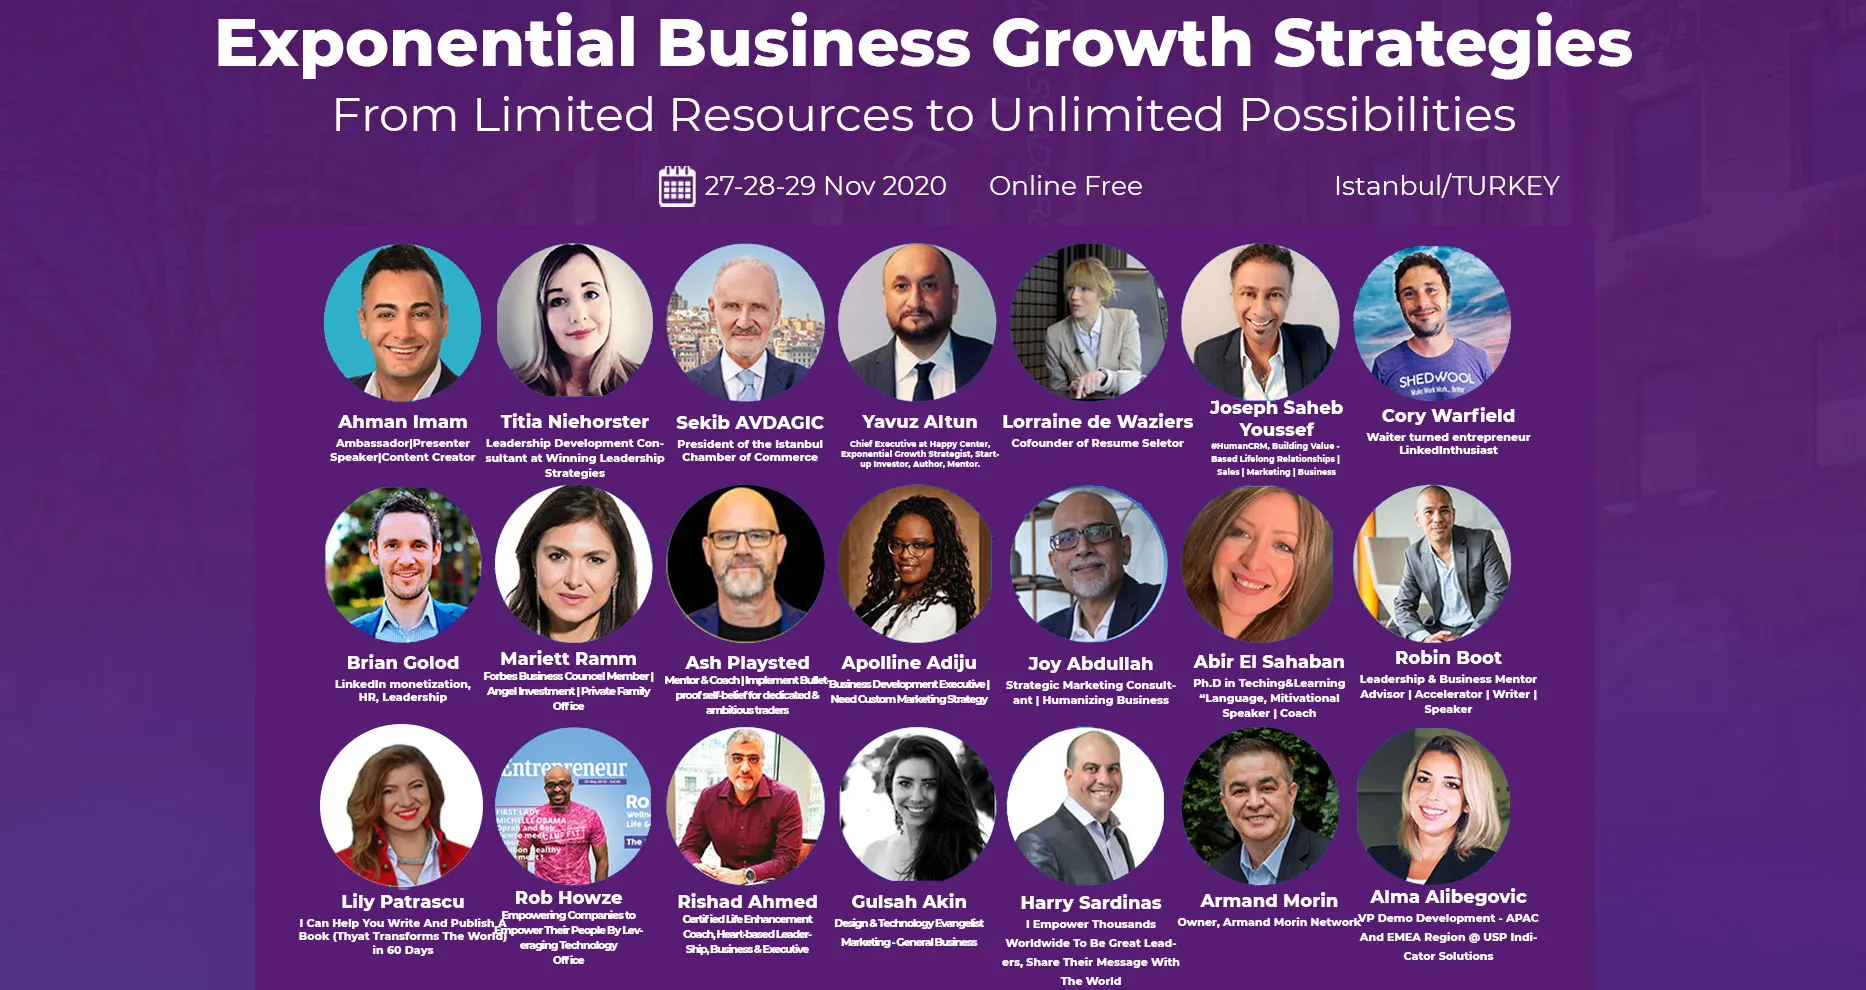 Exponential Business Growth Strategies